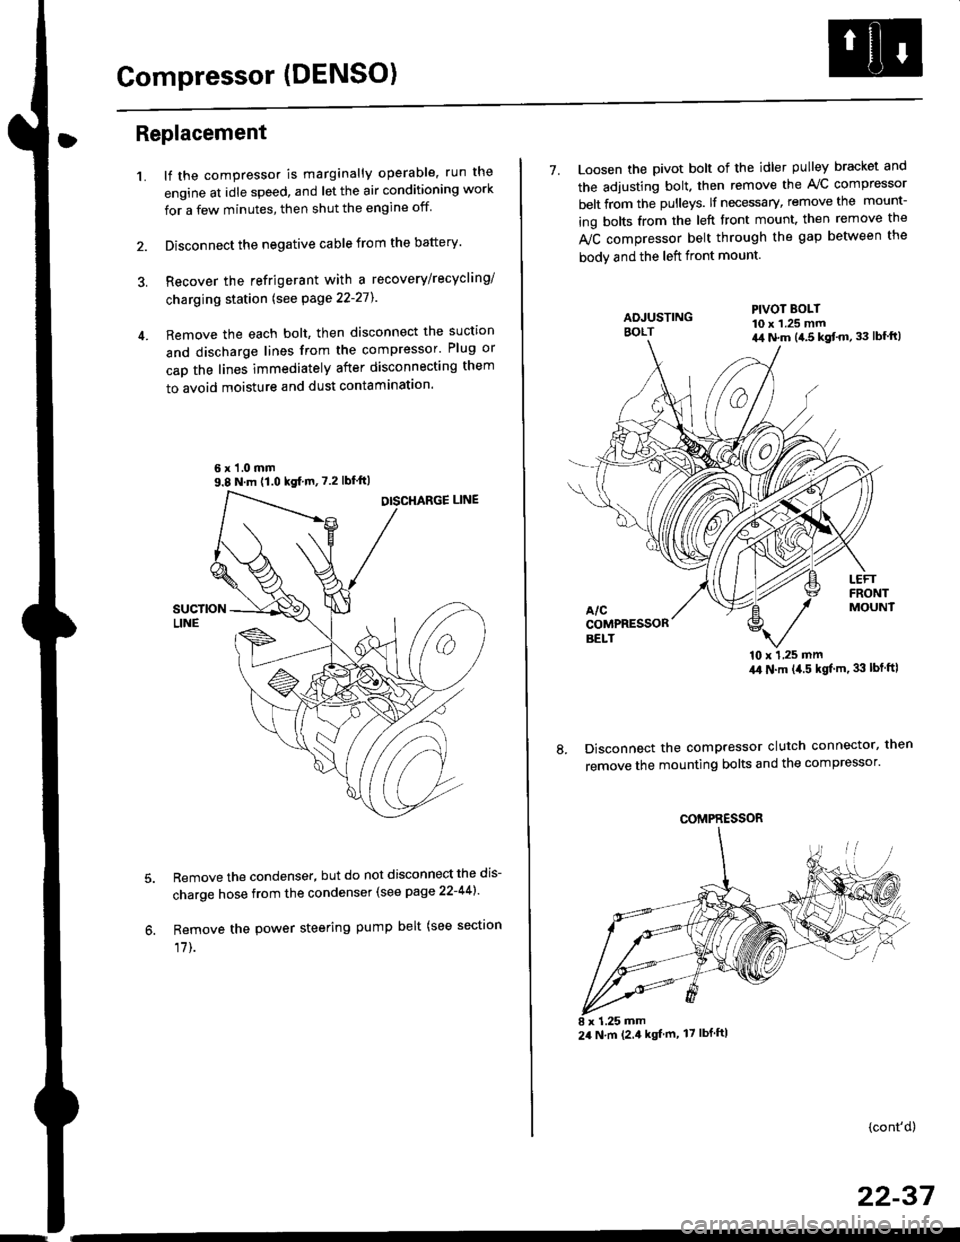 HONDA CIVIC 1999 6.G Workshop Manual Compressor (DENSO)
Replacement
1.lf the compressor is marginally operable, run the
engine at idle speed, and let the air conditioning work
for a few minutes, then shut the engine off
Disconnect the ne